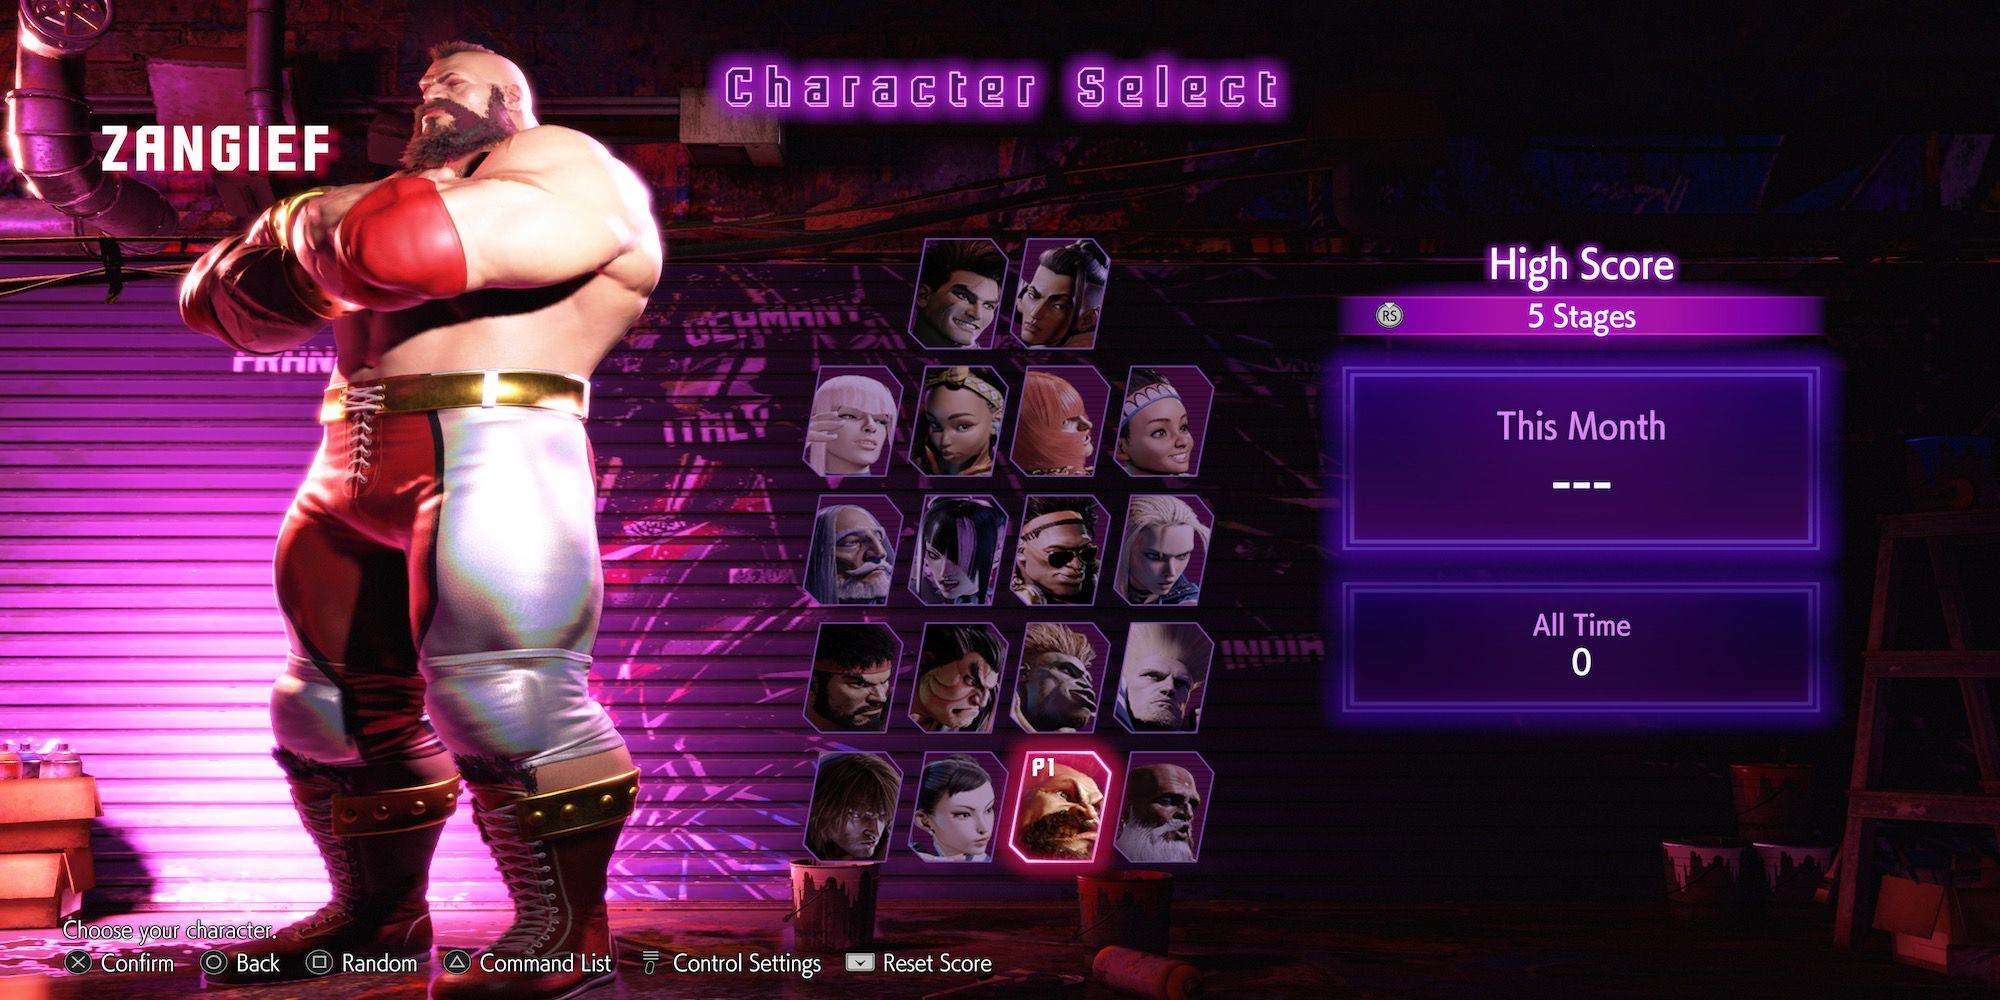 Zangief in the character roster in Street Fighter 6